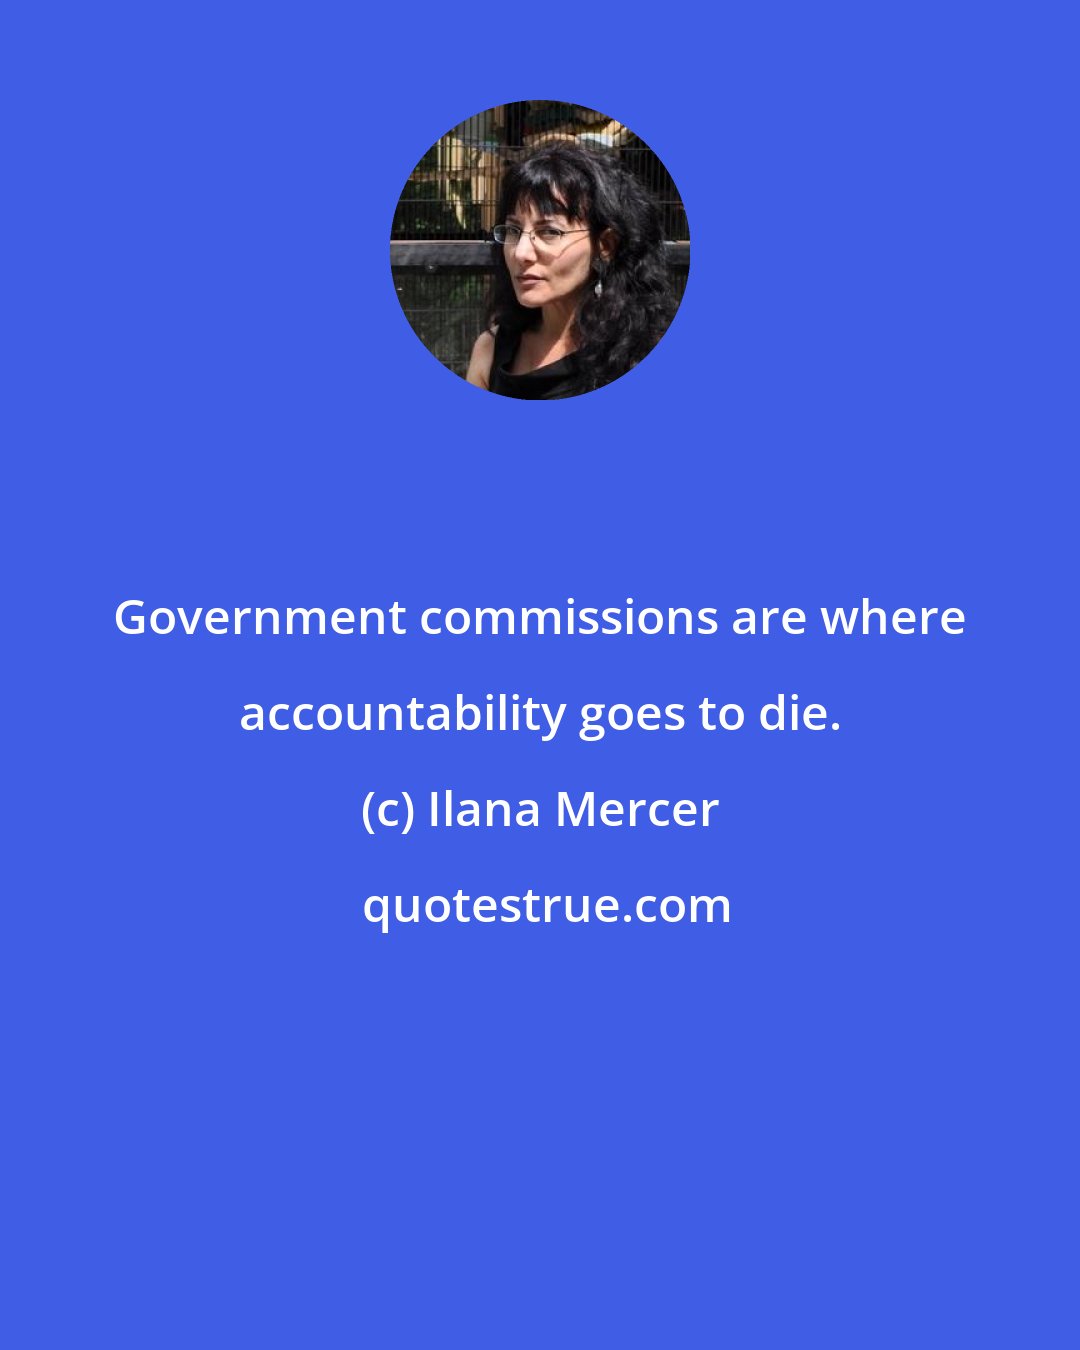 Ilana Mercer: Government commissions are where accountability goes to die.